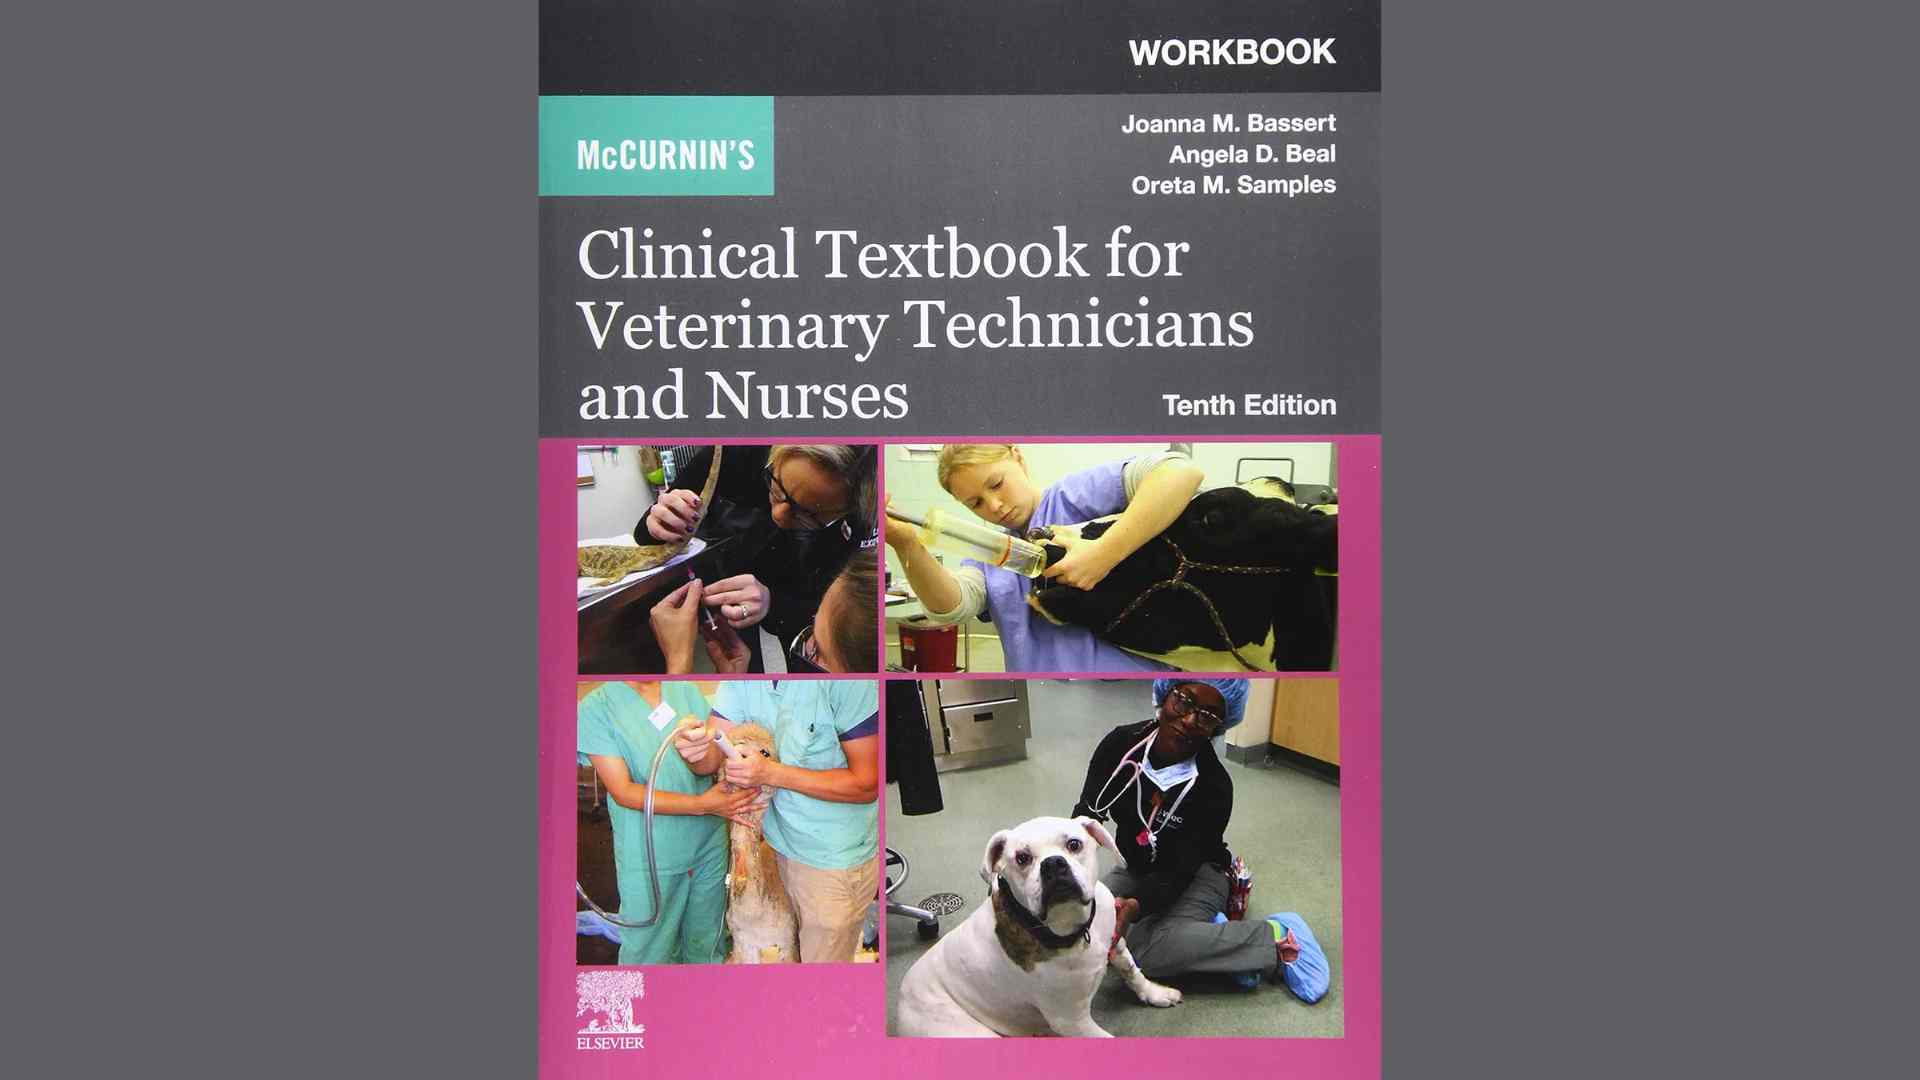 Download McCurnin’s Clinical Textbook for Veterinary Technicians and Nurses 10th Edition